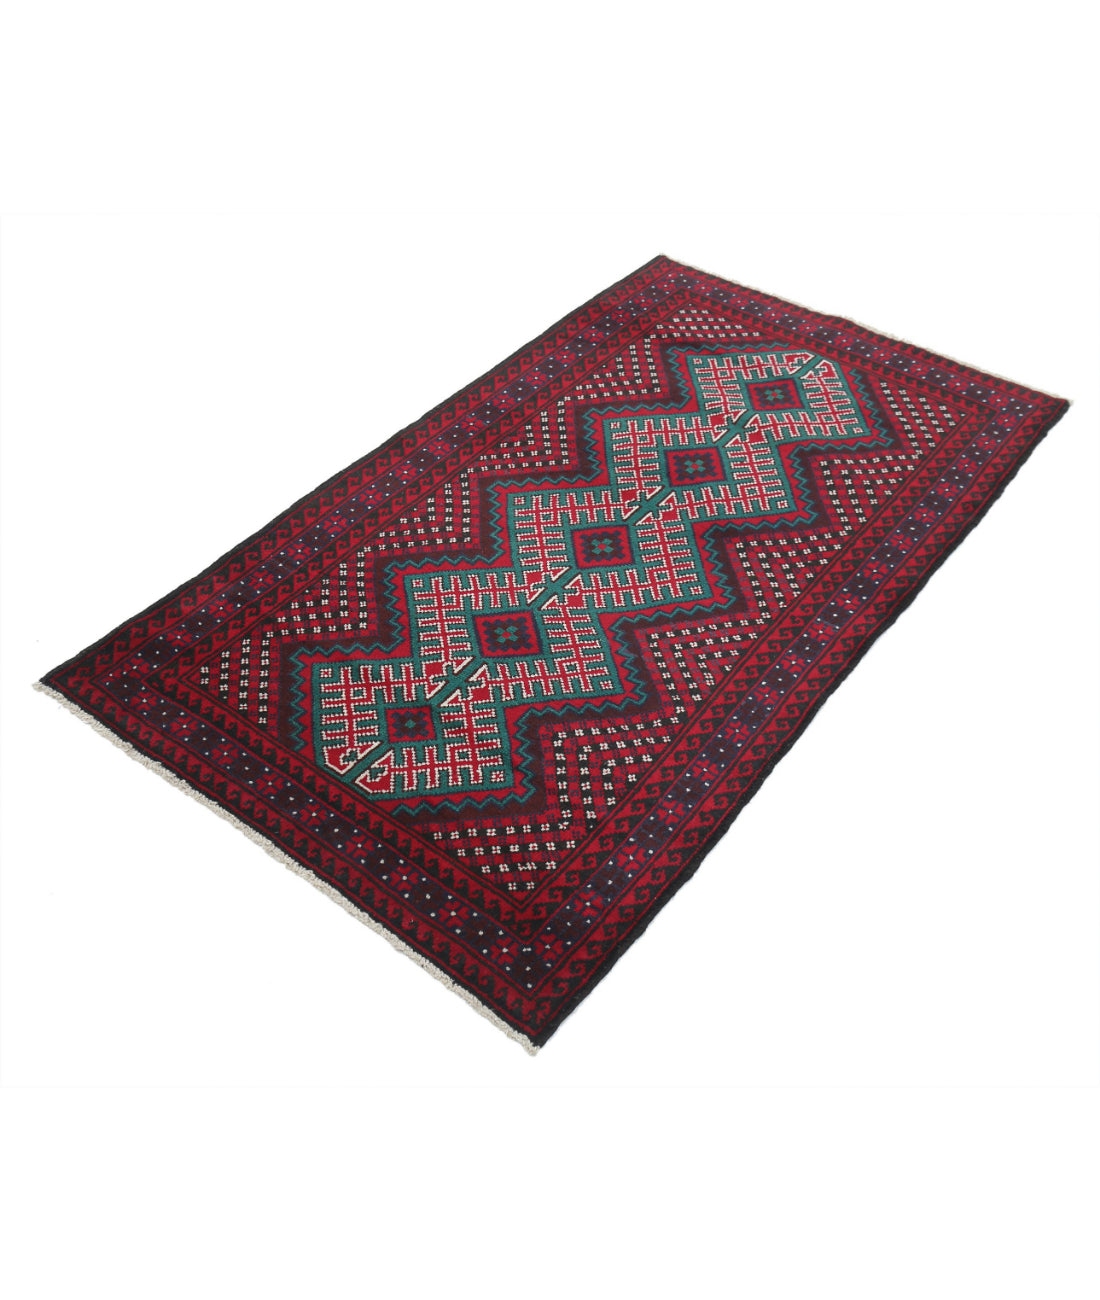 Baluch 2'10'' X 5'0'' Hand-Knotted Wool Rug 2'10'' x 5'0'' (85 X 150) / Red / N/A